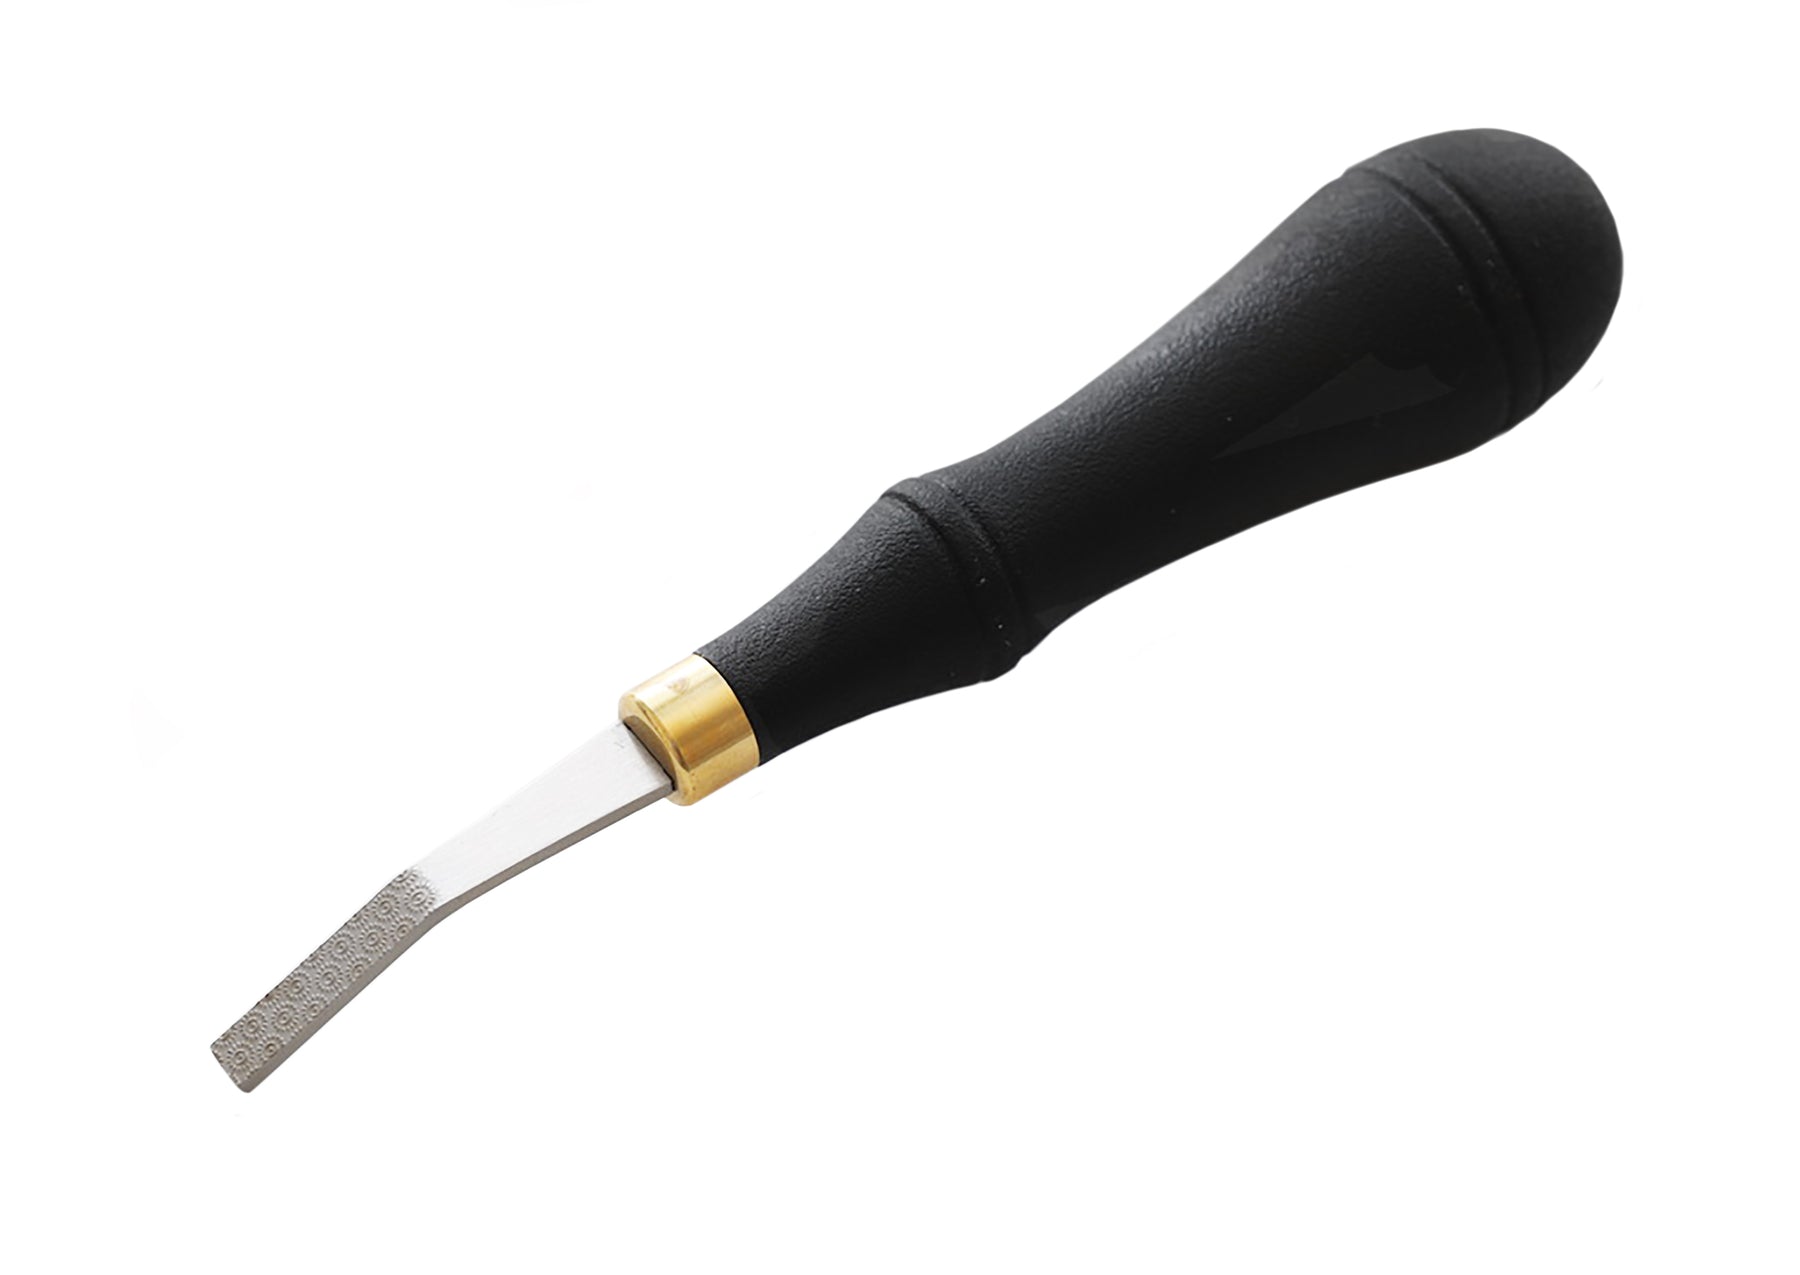  DIUDUS Pro Detail Rougher, Leather Roughing Tool